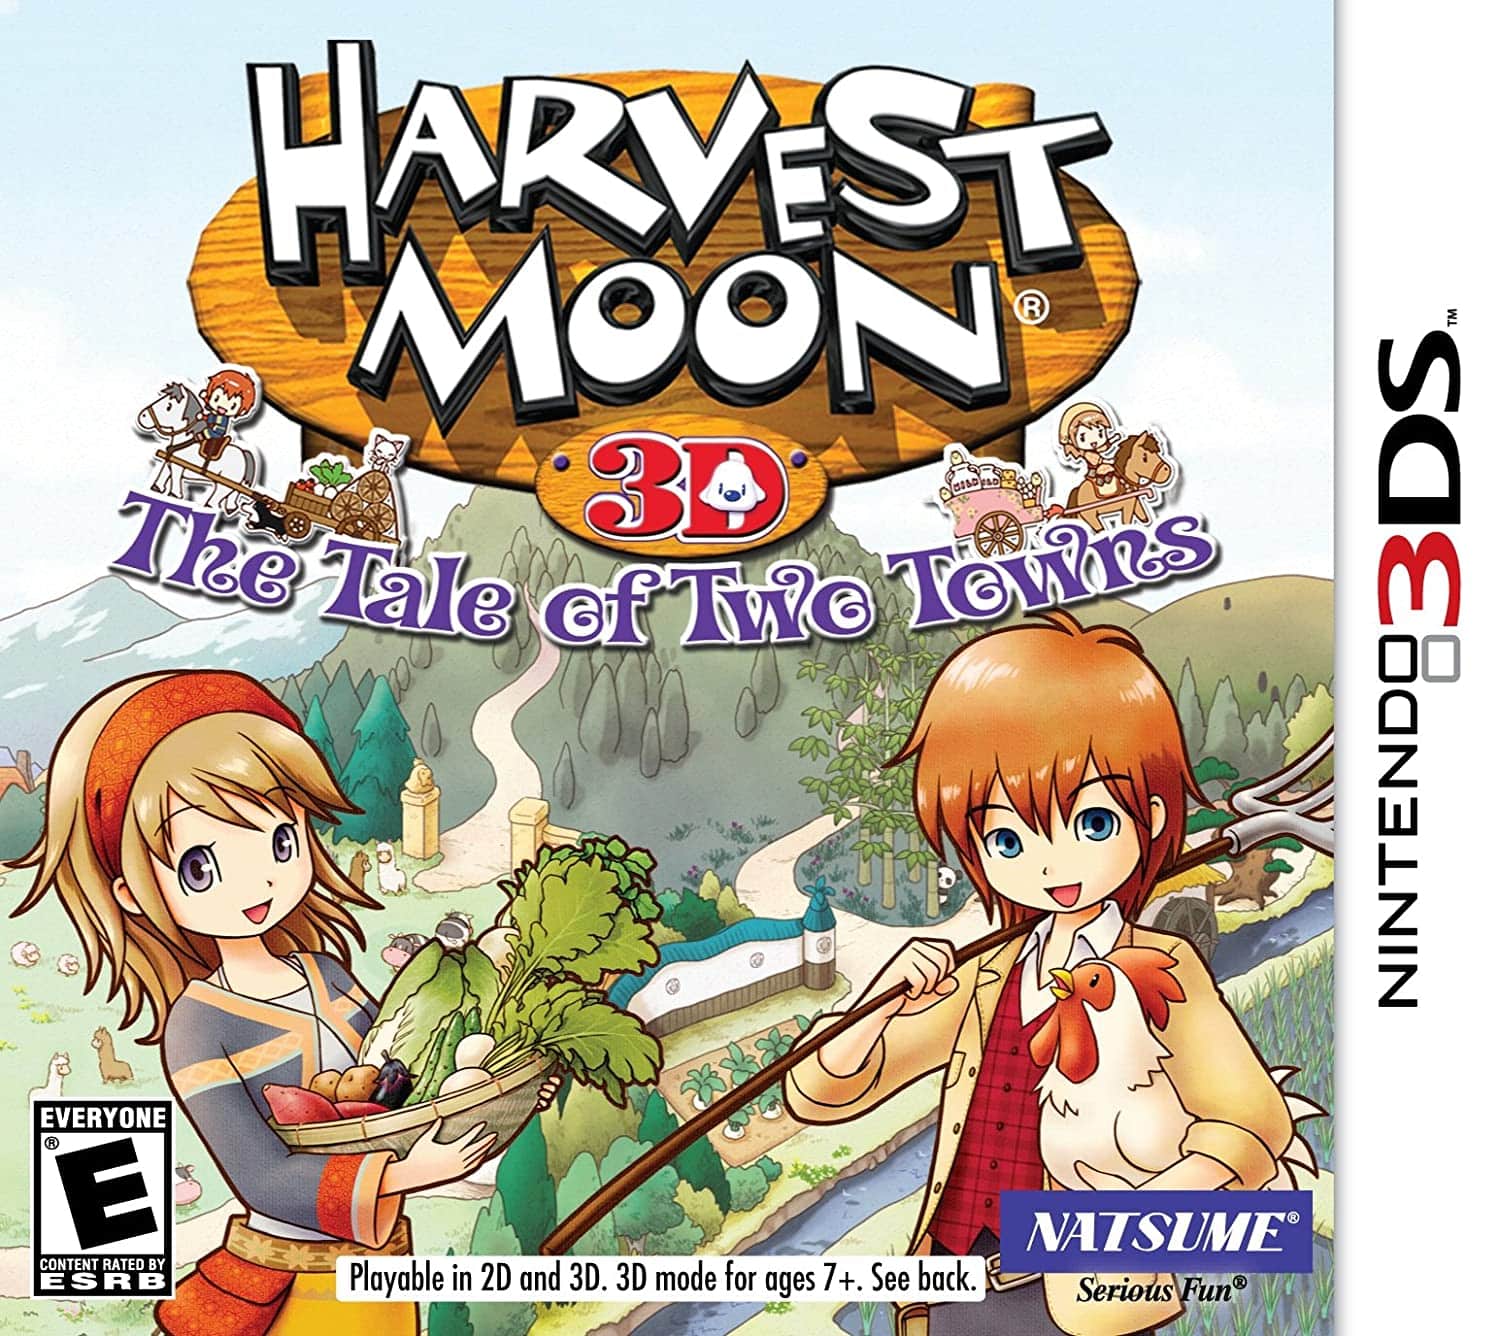 Harvest Moon: The Tale of Two Towns player count stats